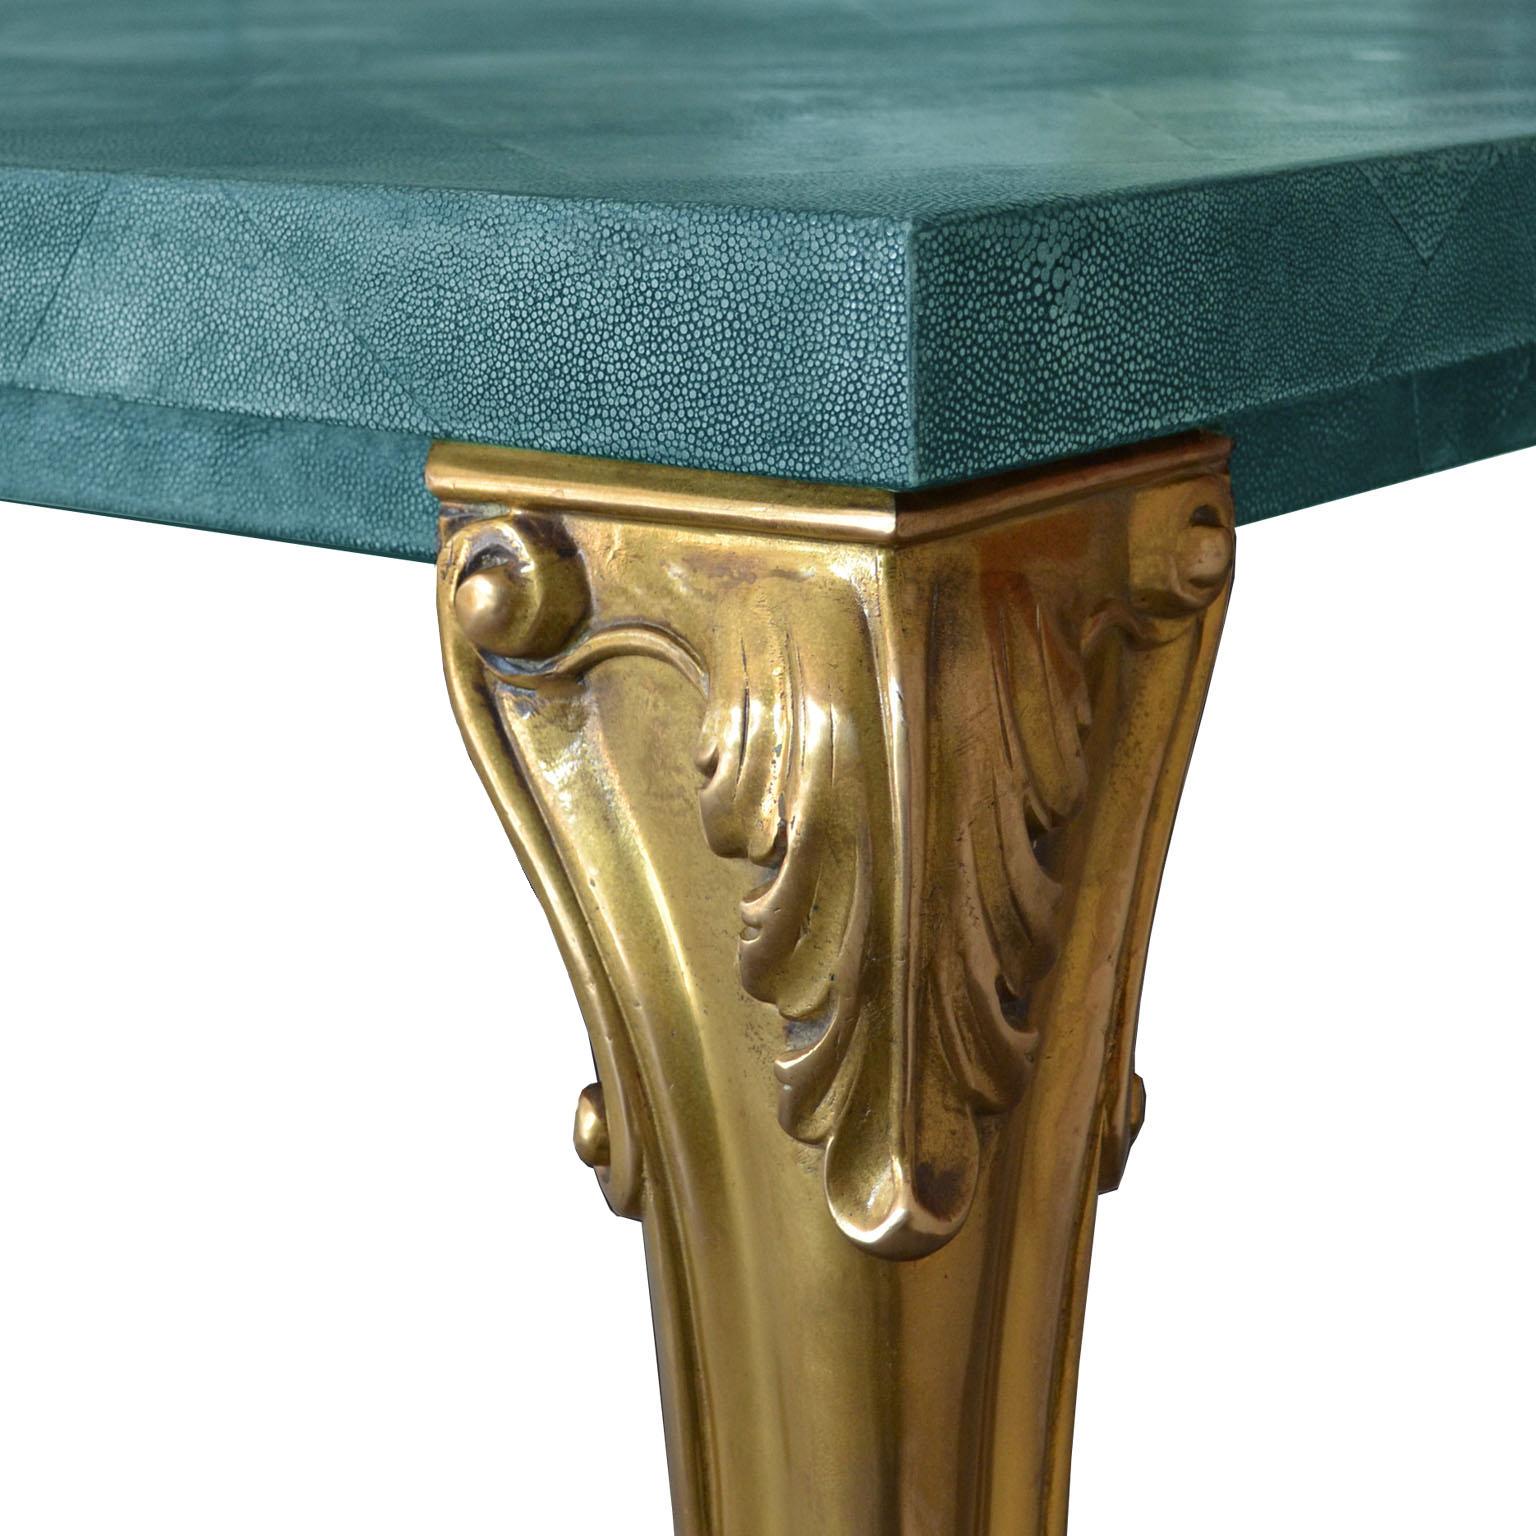 Nerone is a sophisticated dining table, the perfect example of the continuous research of our handicraft laboratory where we emphasize the material “scagliola” in the multitude of its various peculiarities.
The top of the table is decorated using